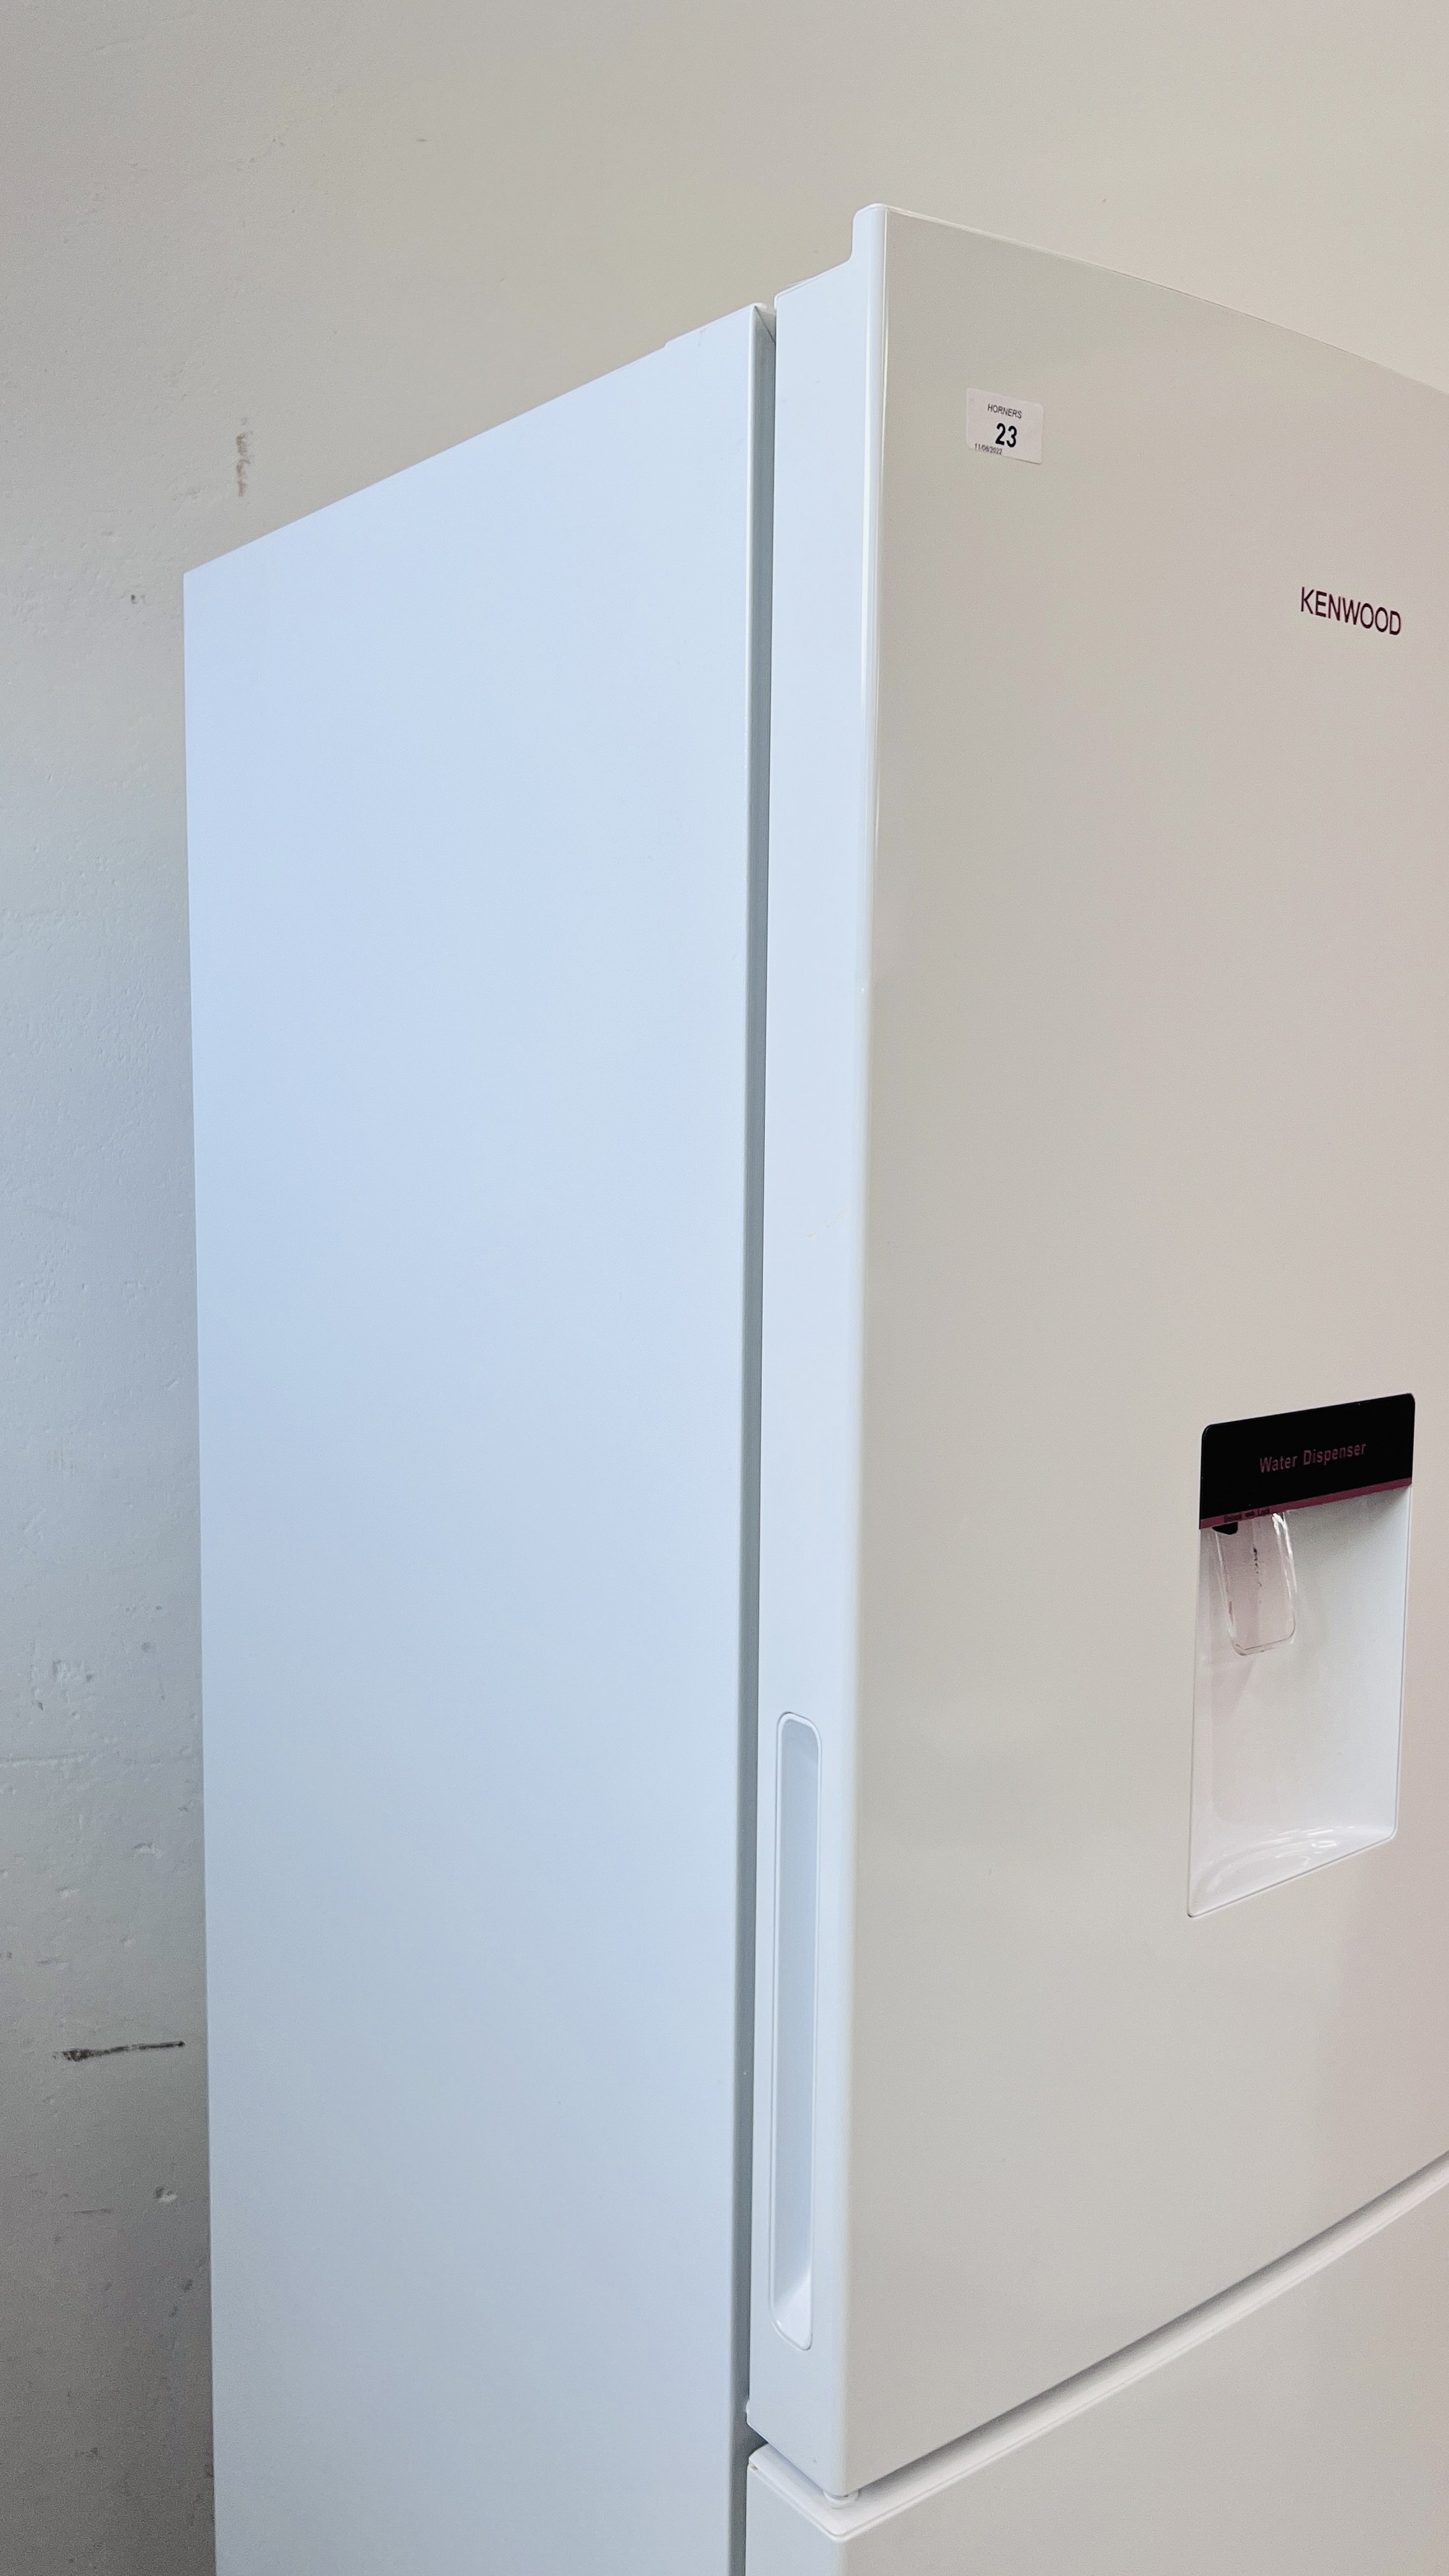 KENWOOD FROST FREE FRIDGE FREEZER WITH WATER DISPENSER - SOLD AS SEEN. - Image 5 of 11